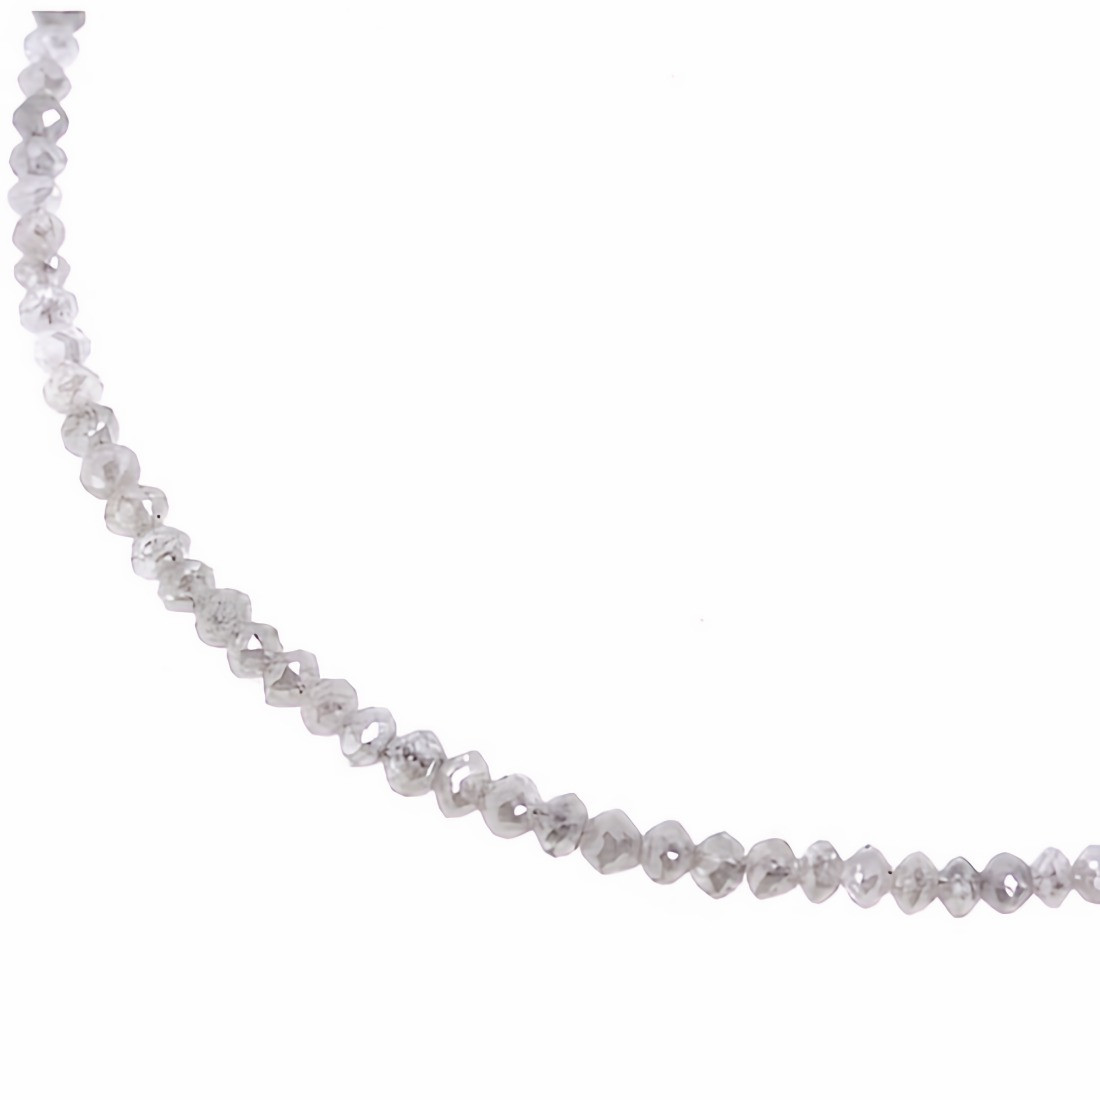 22.50ct Fancy Grey Diamond Faceted Bead Necklace 14k White Gold